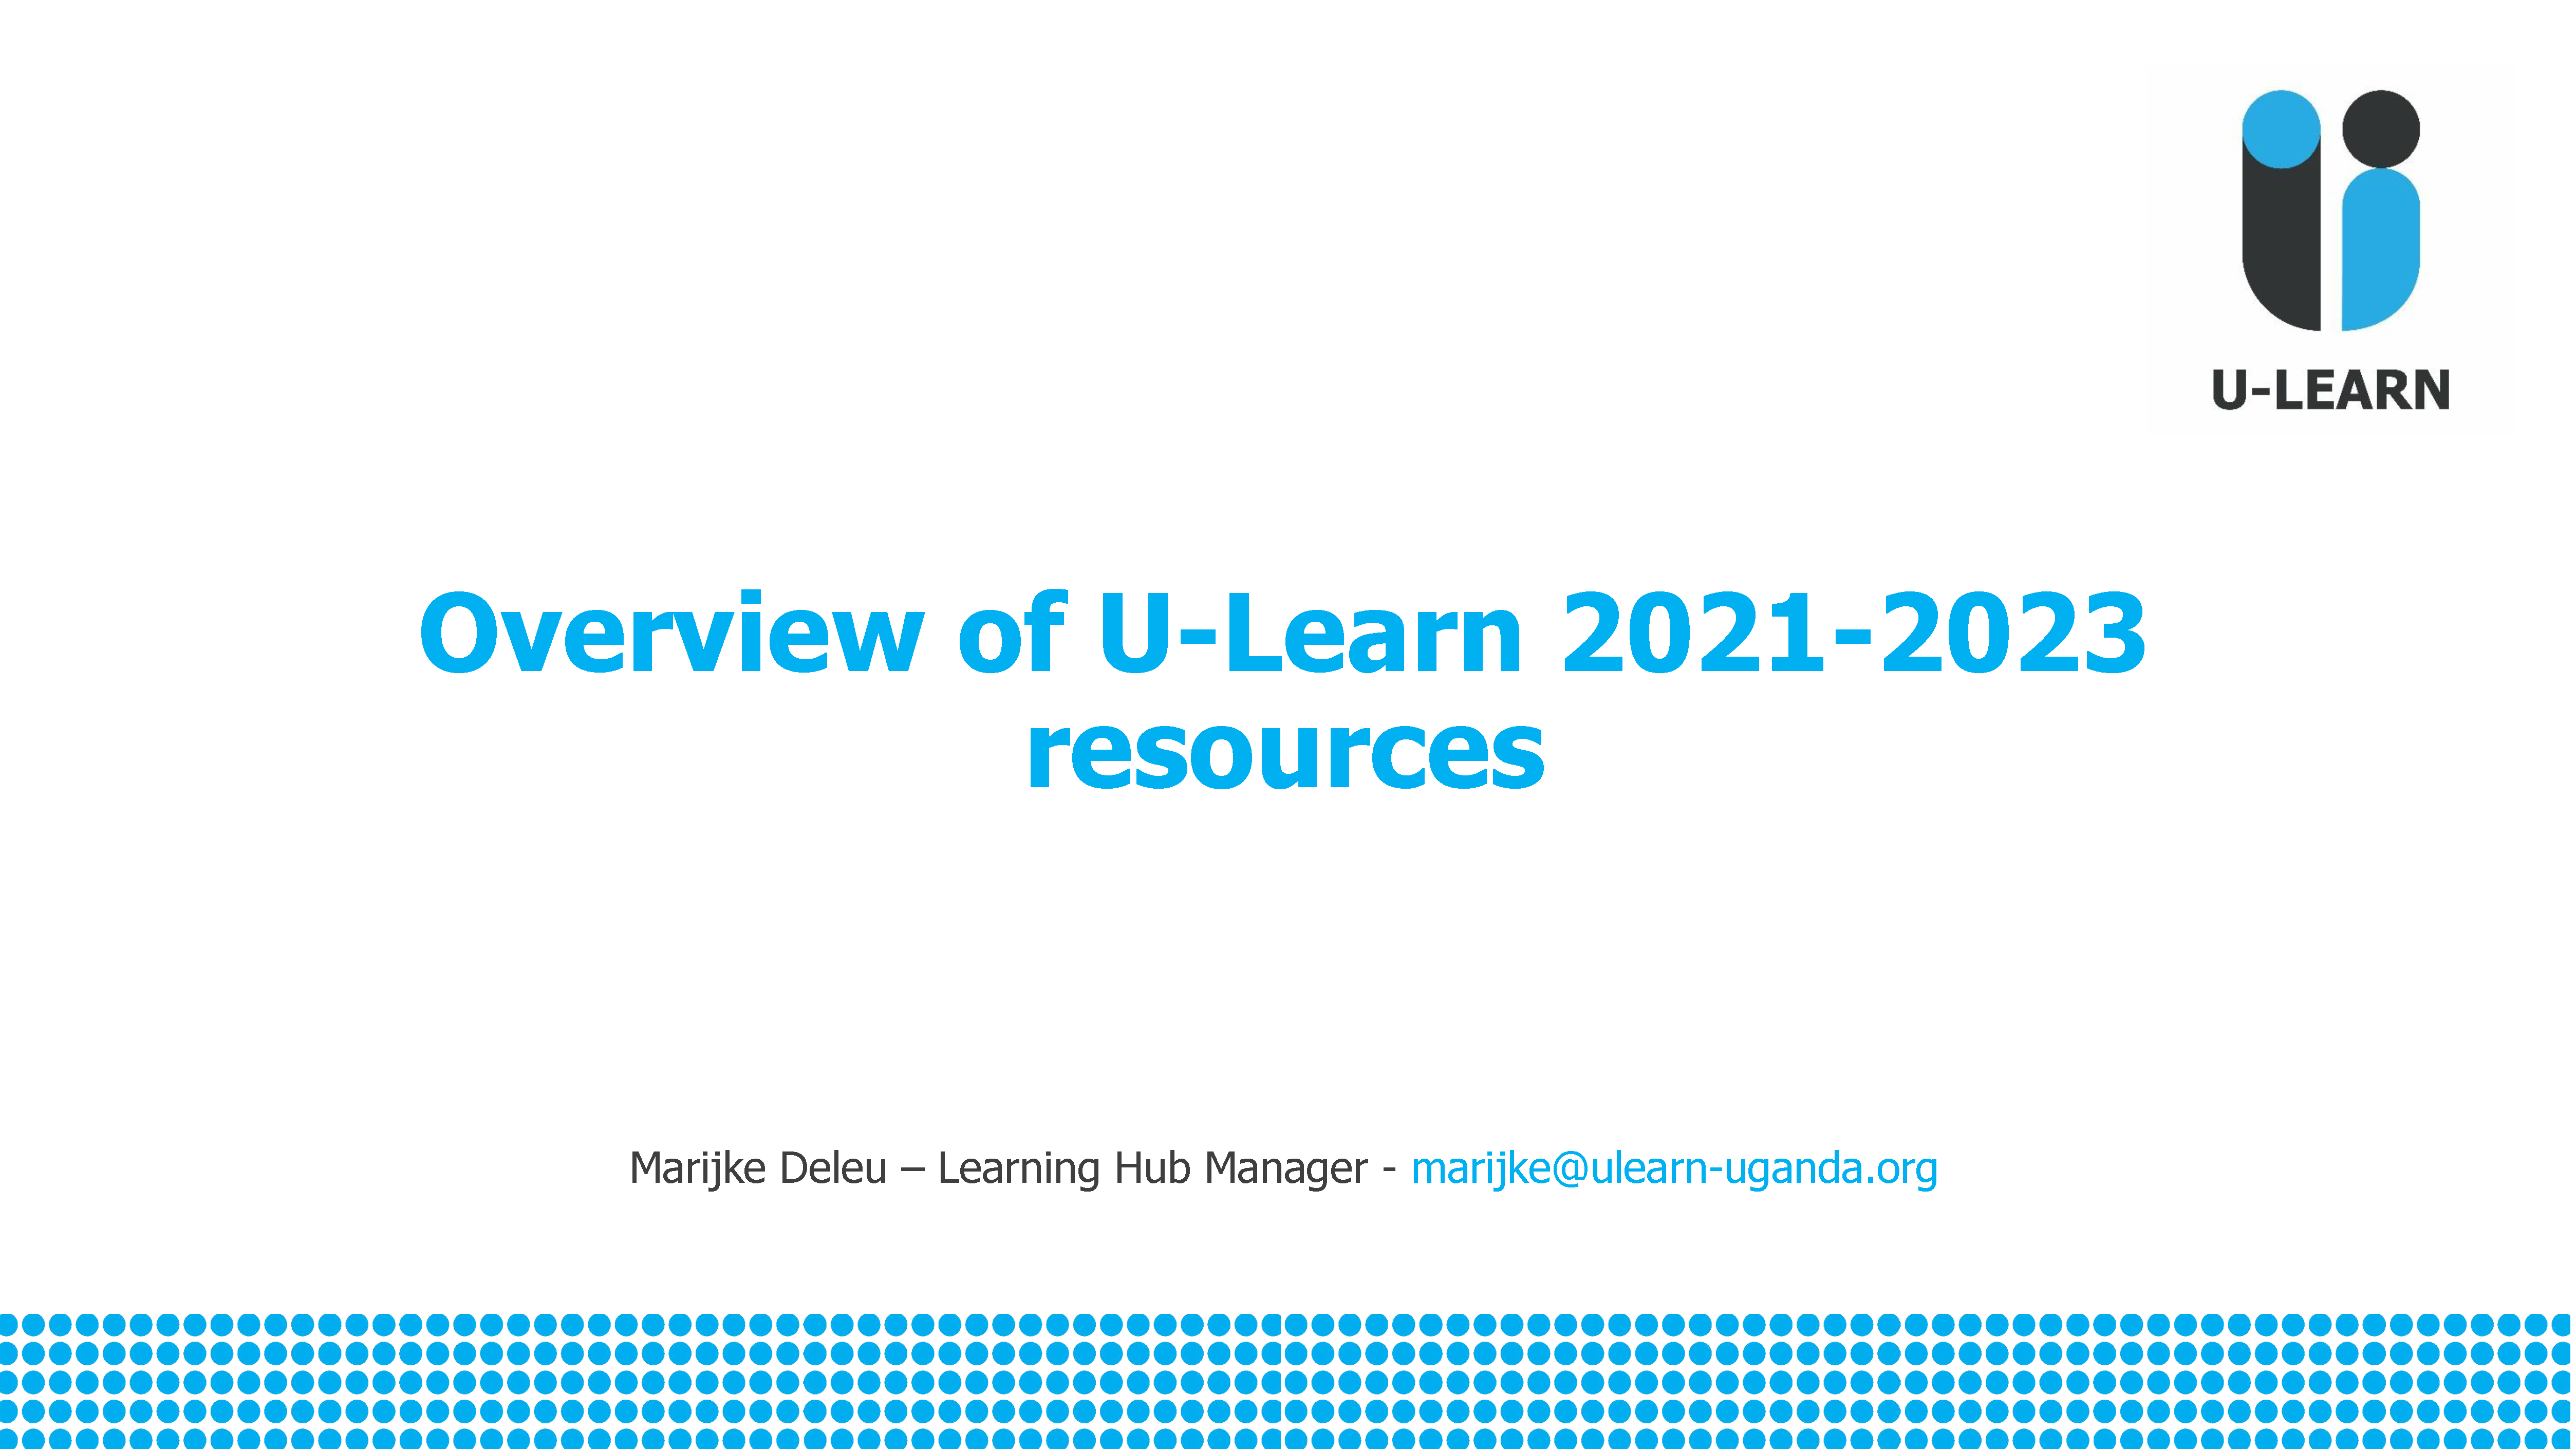 Cover page of the U-Learn Resources from 2021-2023.